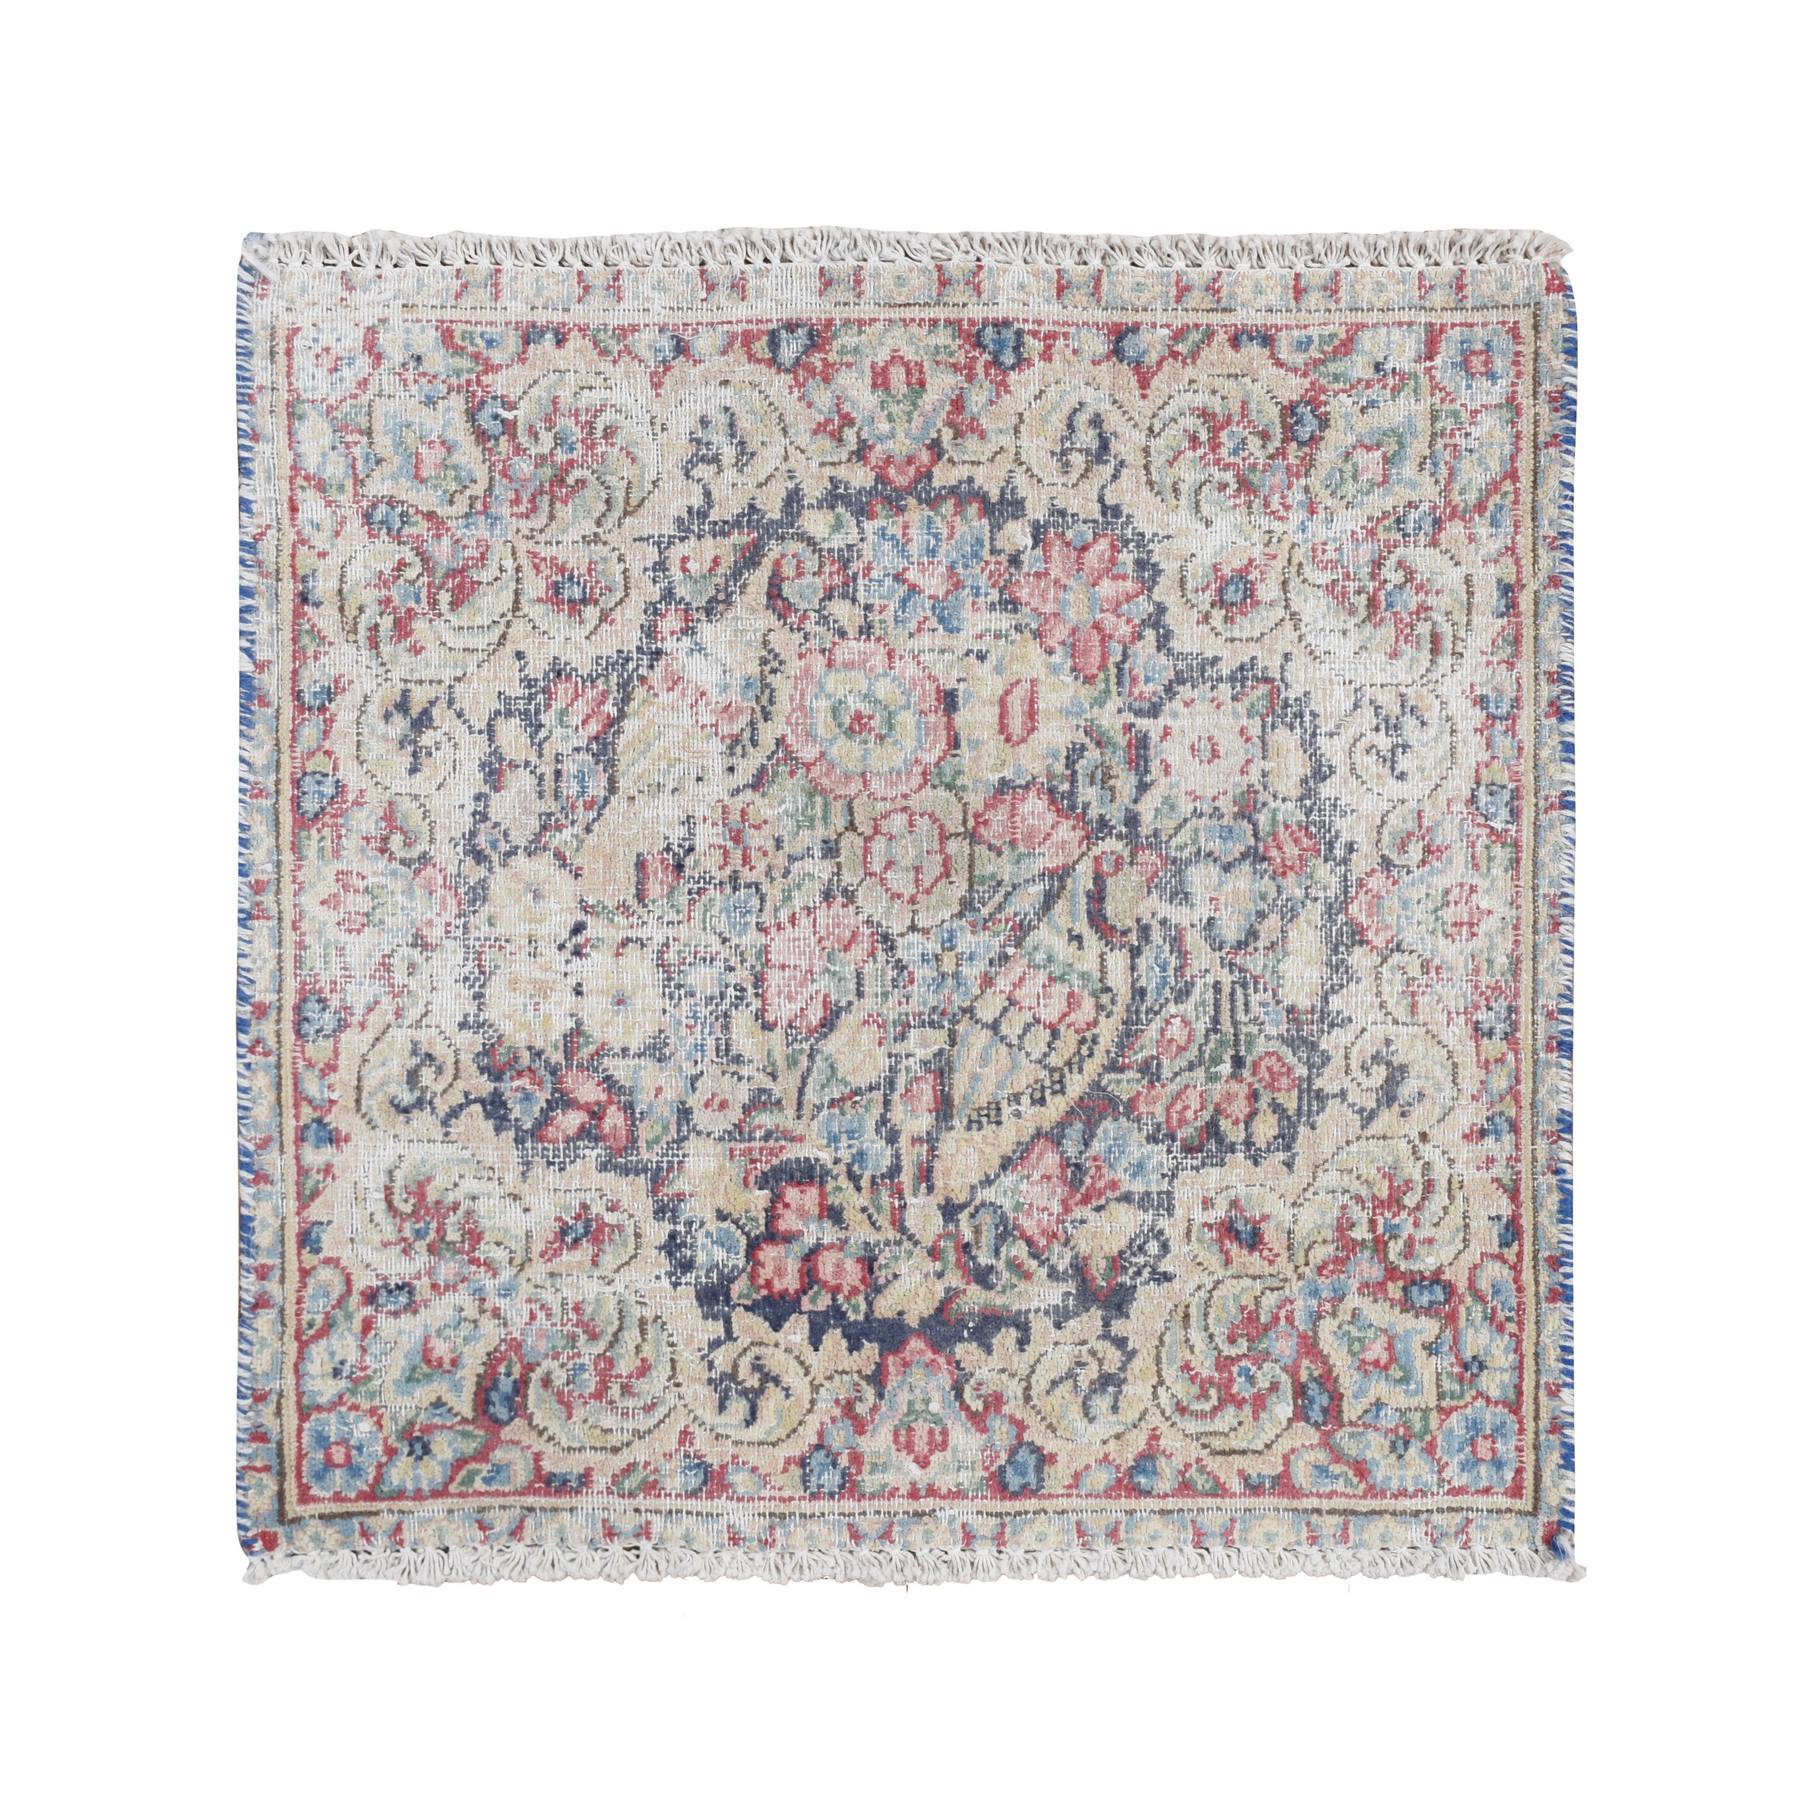  Wool Hand-Knotted Area Rug 1'7